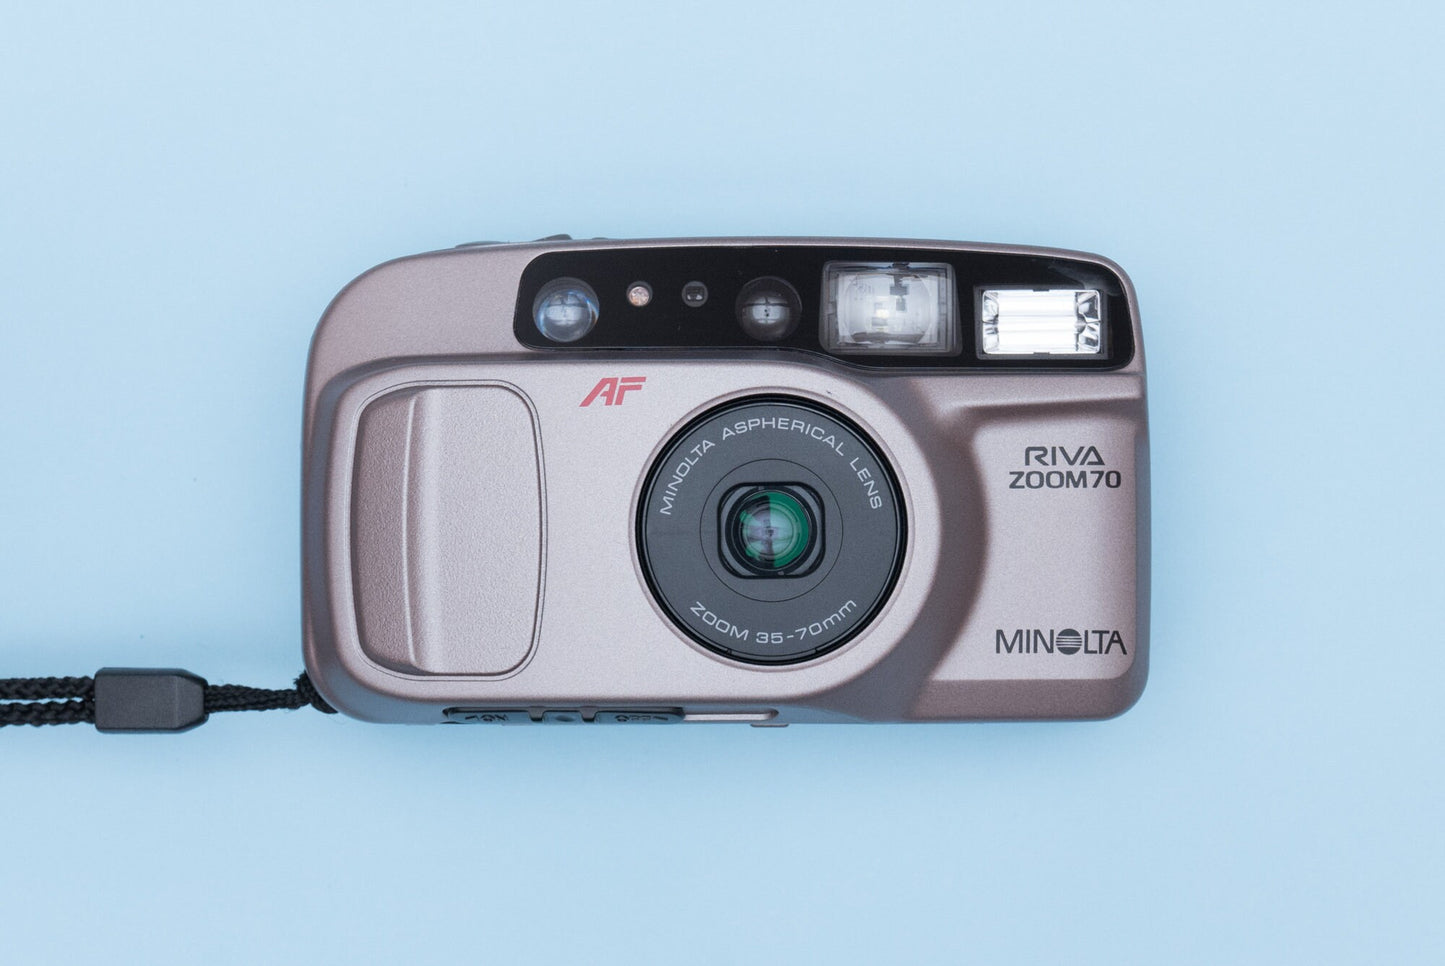 Minolta Riva Zoom 70 Compact 35mm Point and Shoot Film Camera Graphite